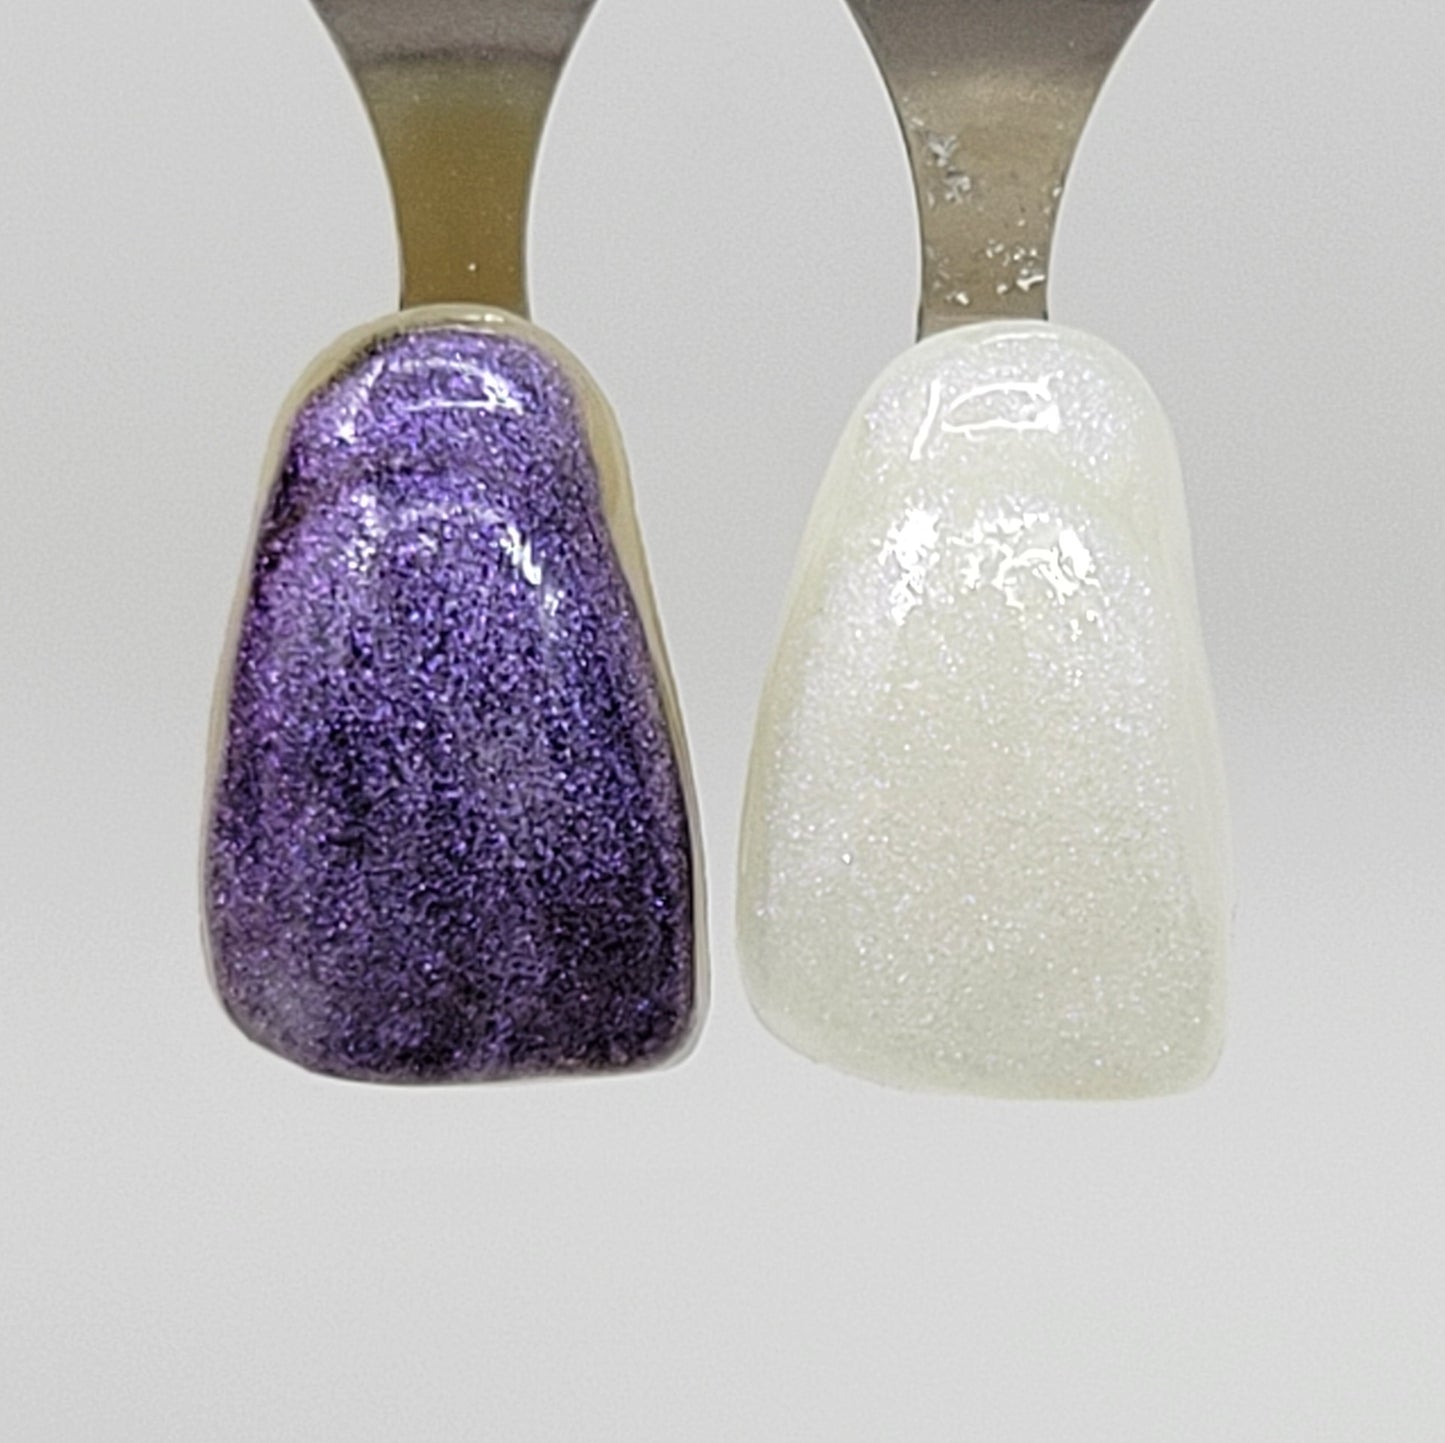 Purple Galaxy Temporary Tattooth Colorant on a demo tooth.  These colorants can be applied to teeth to temporarily alter their color or iridescence.